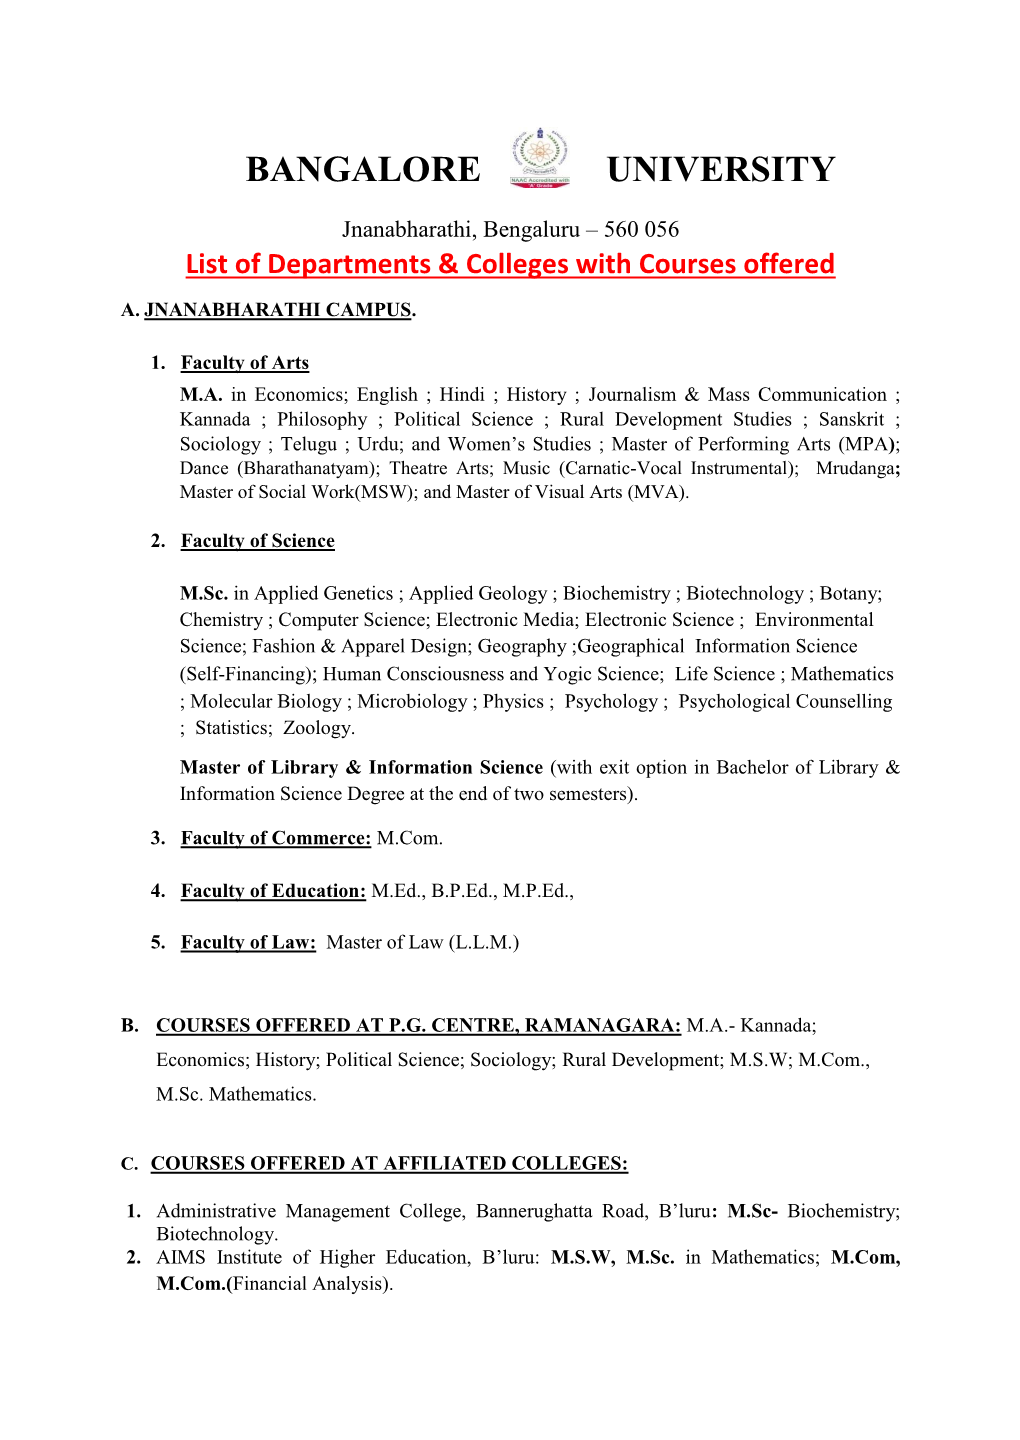 List of Departments & Colleges with Courses Offered